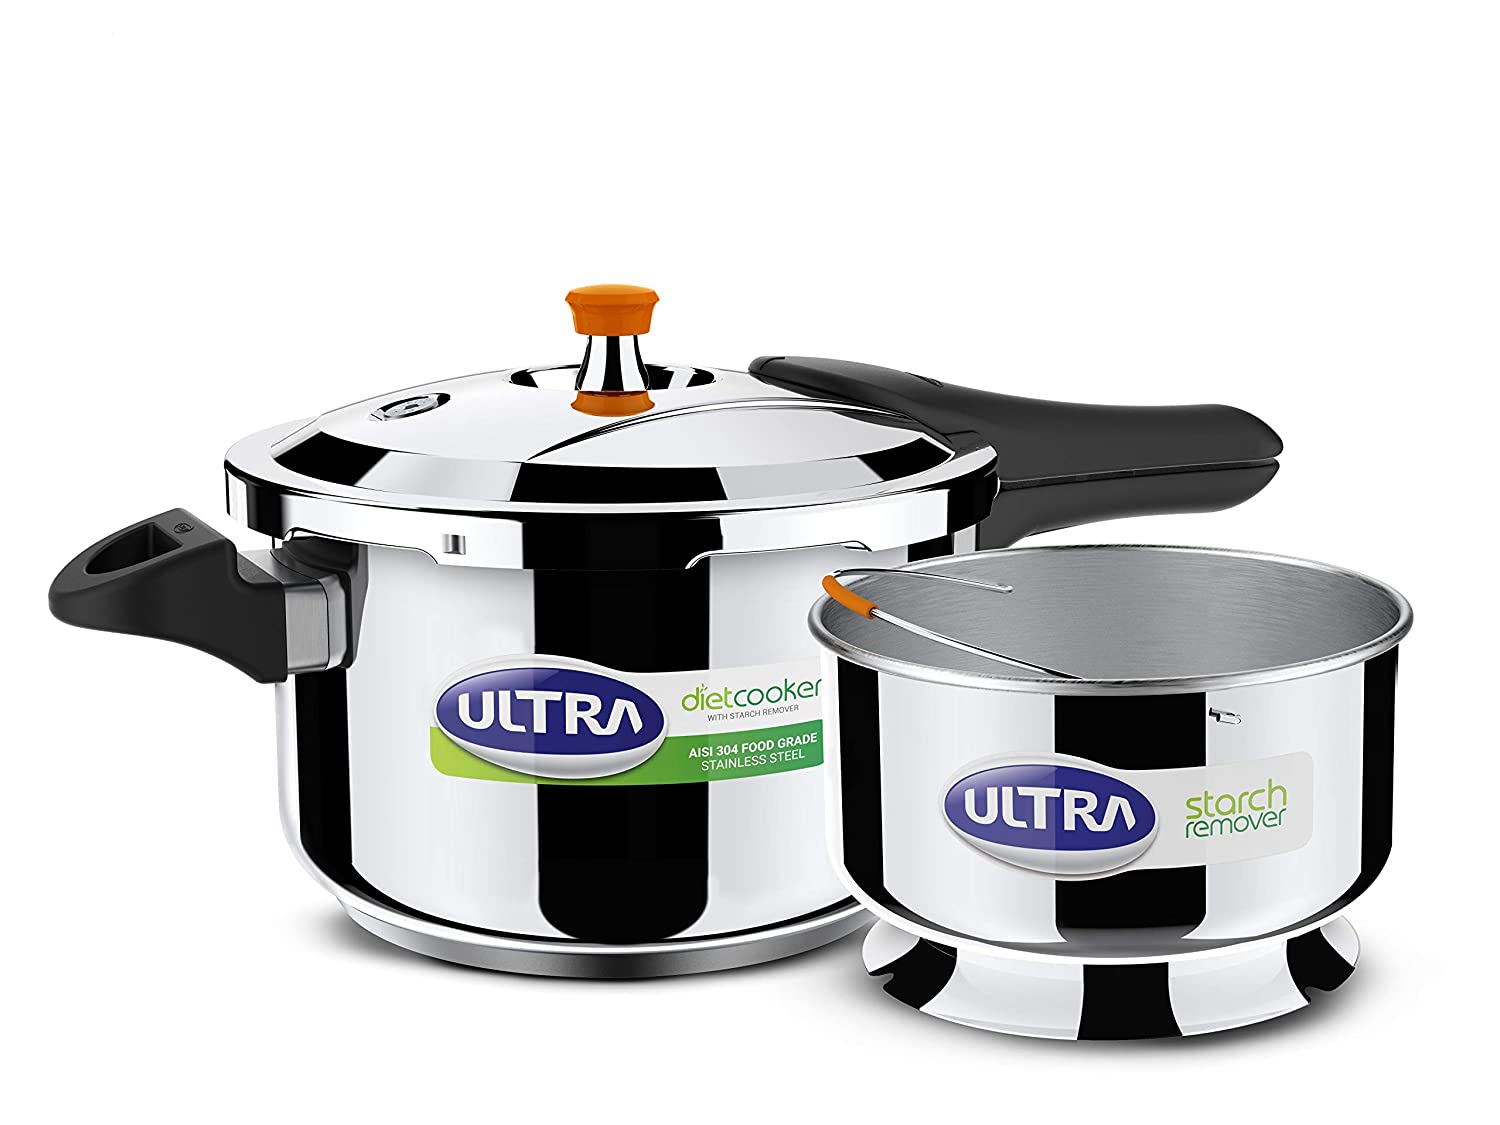 ULTRA Duracook Diet Pressure Cooker with Starch Remover